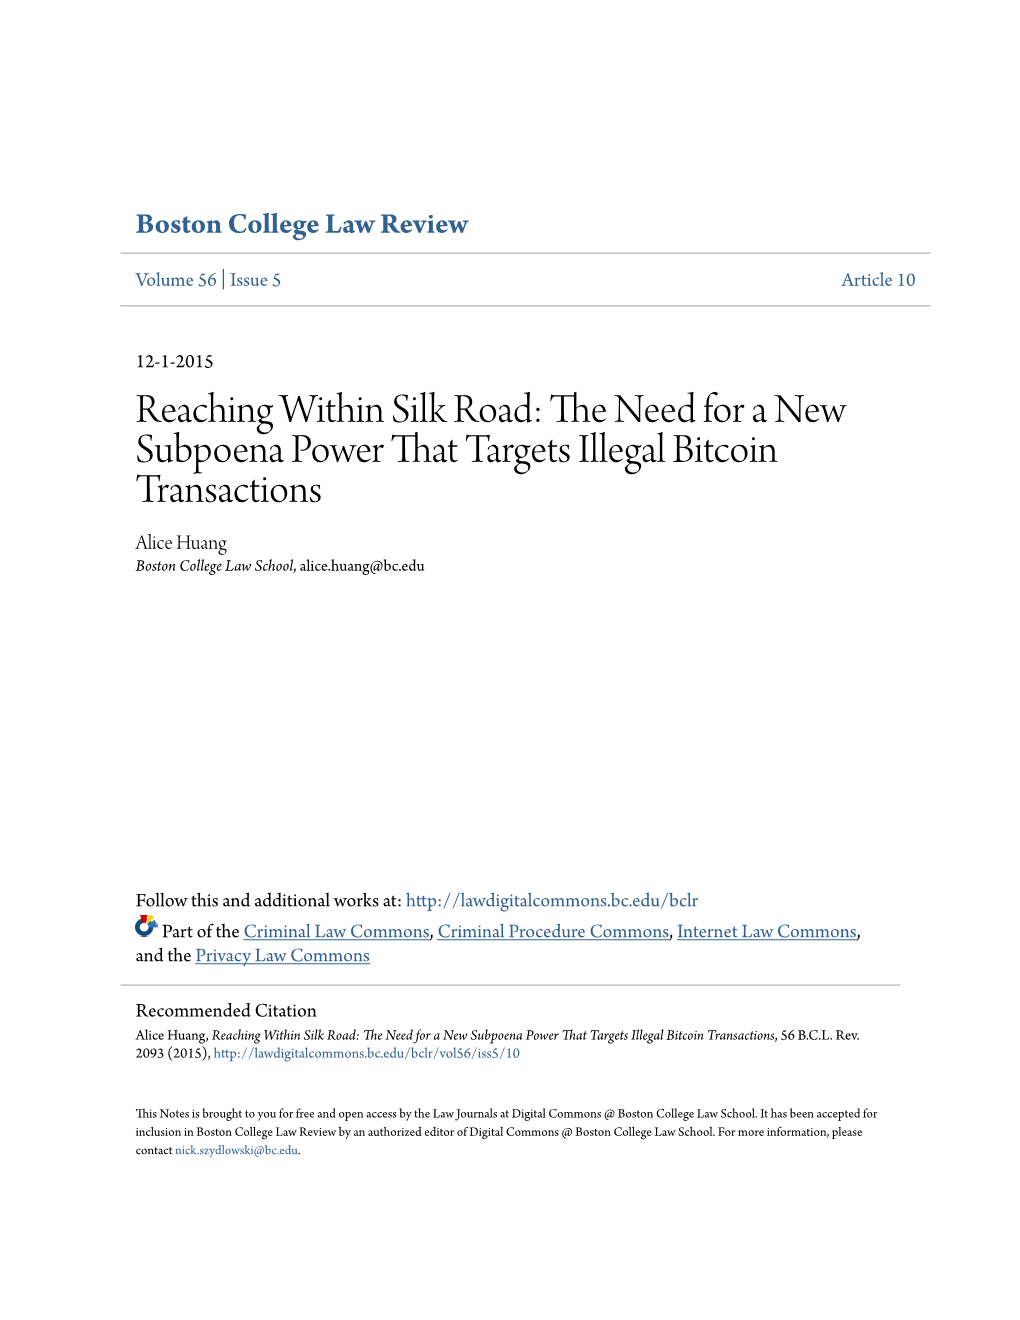 The Need for a New Subpoena Power That Targets Illegal Bitcoin Transactions, 56 B.C.L